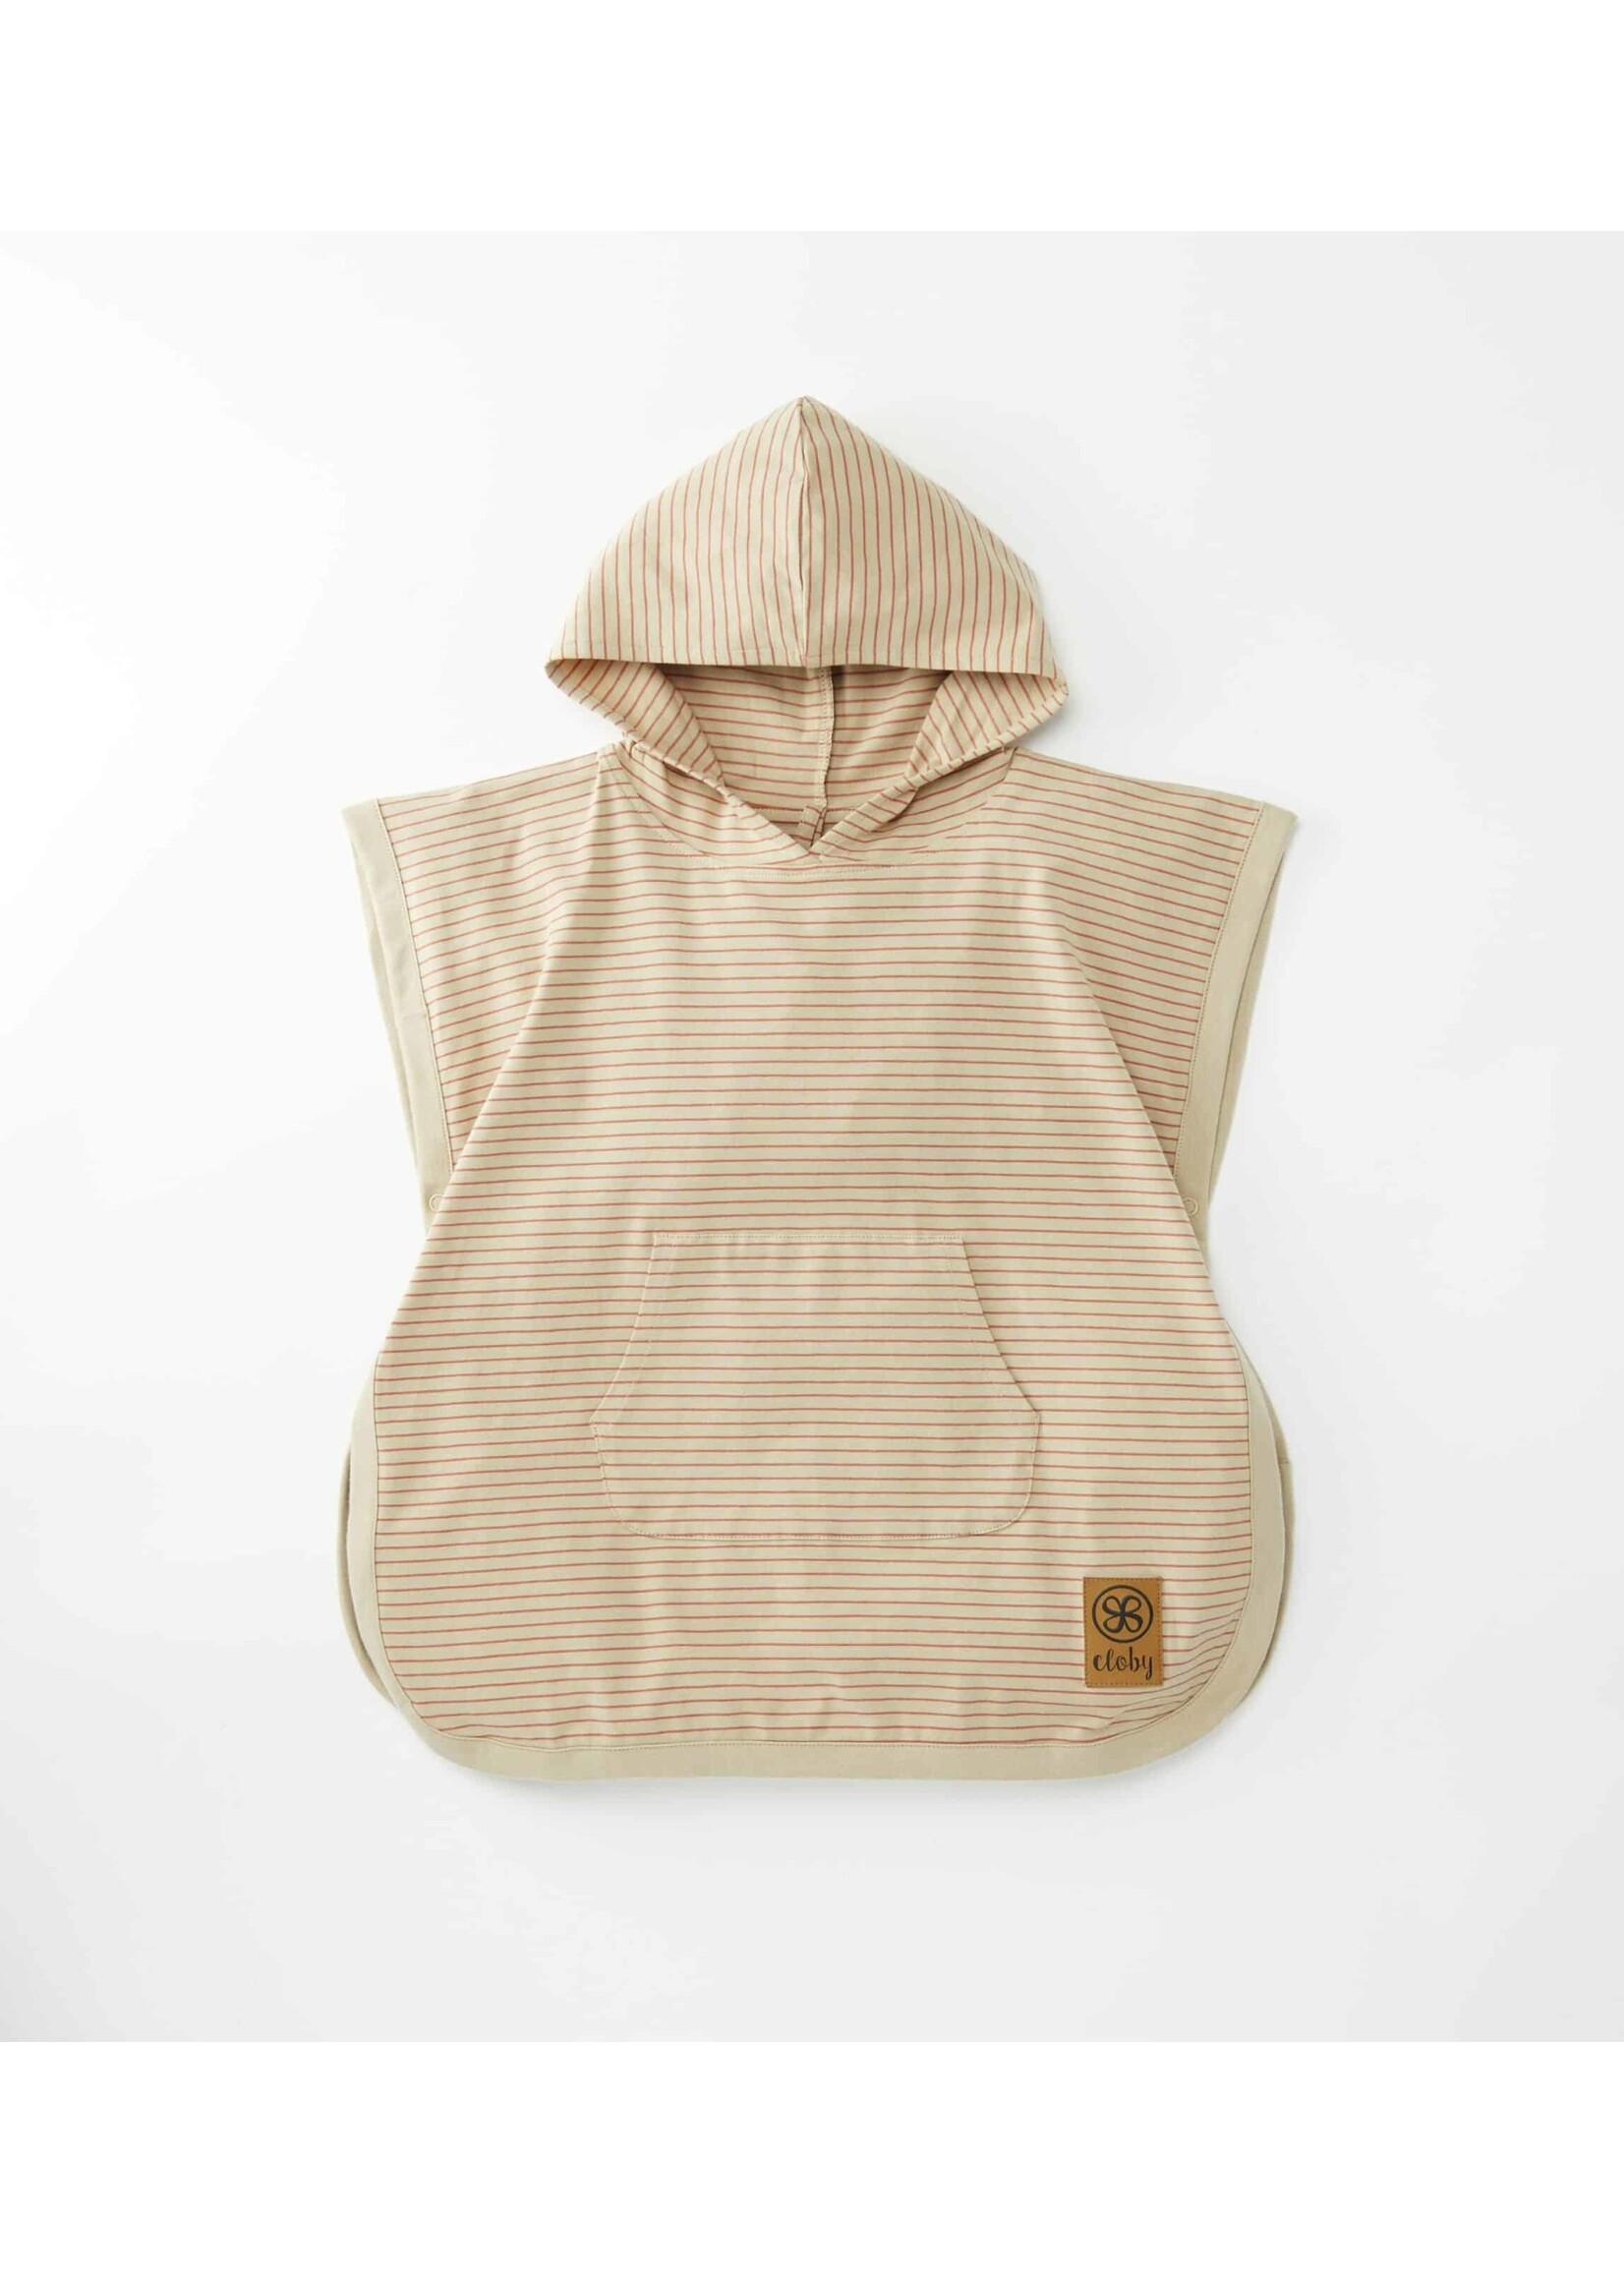 Cloby Cloby / UV poncho / Spicy ginger